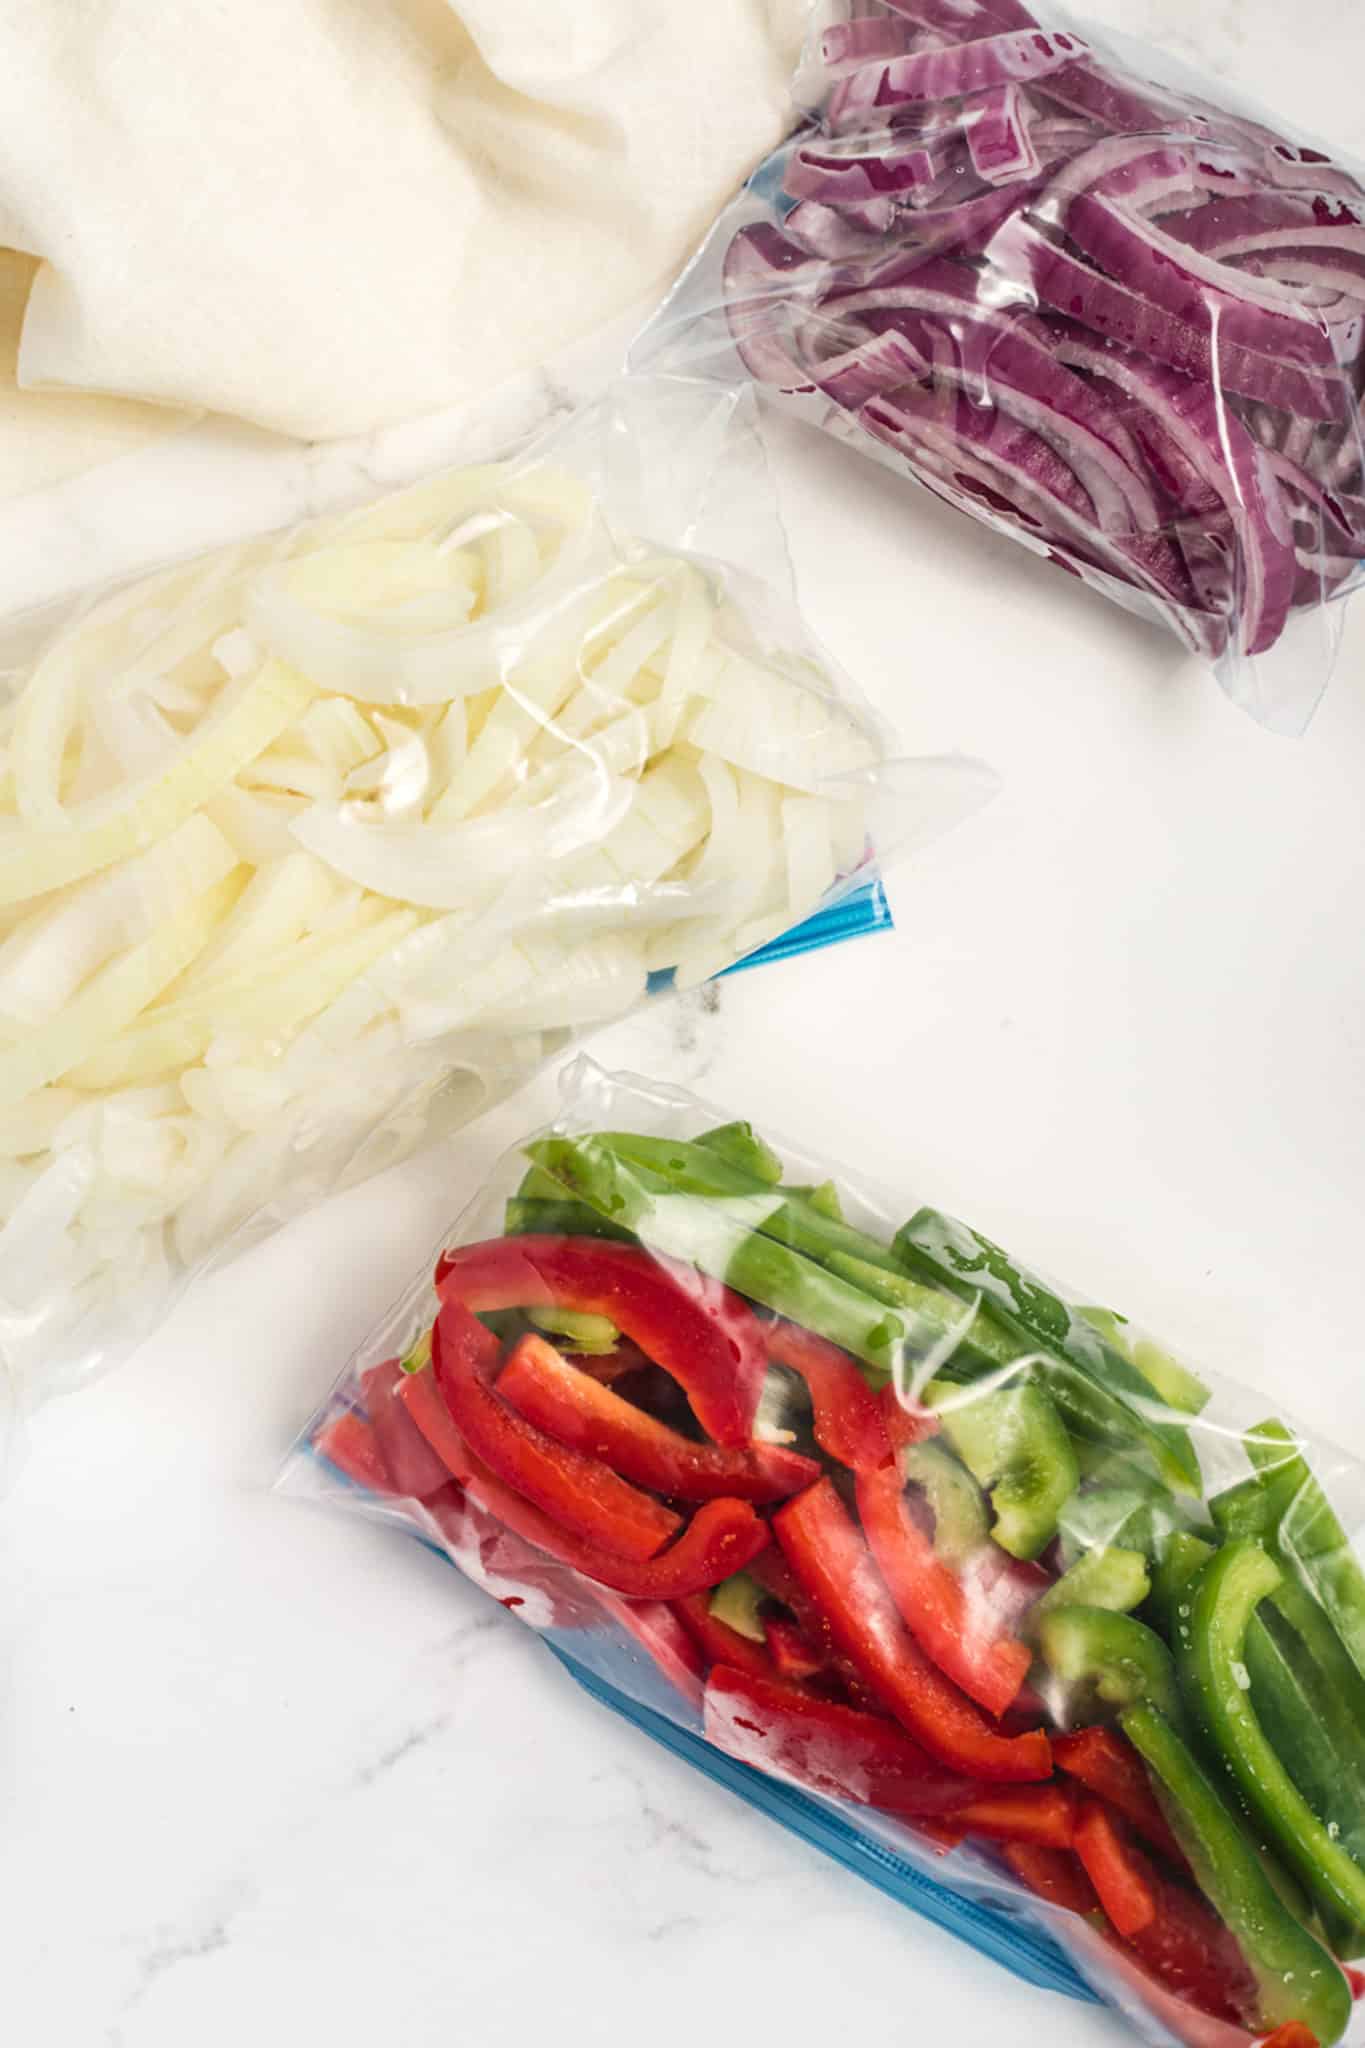 https://www.cleaneatingkitchen.com/wp-content/uploads/2021/05/how-to-freeze-peppers-and-onions-vertical-hero-scaled.jpg